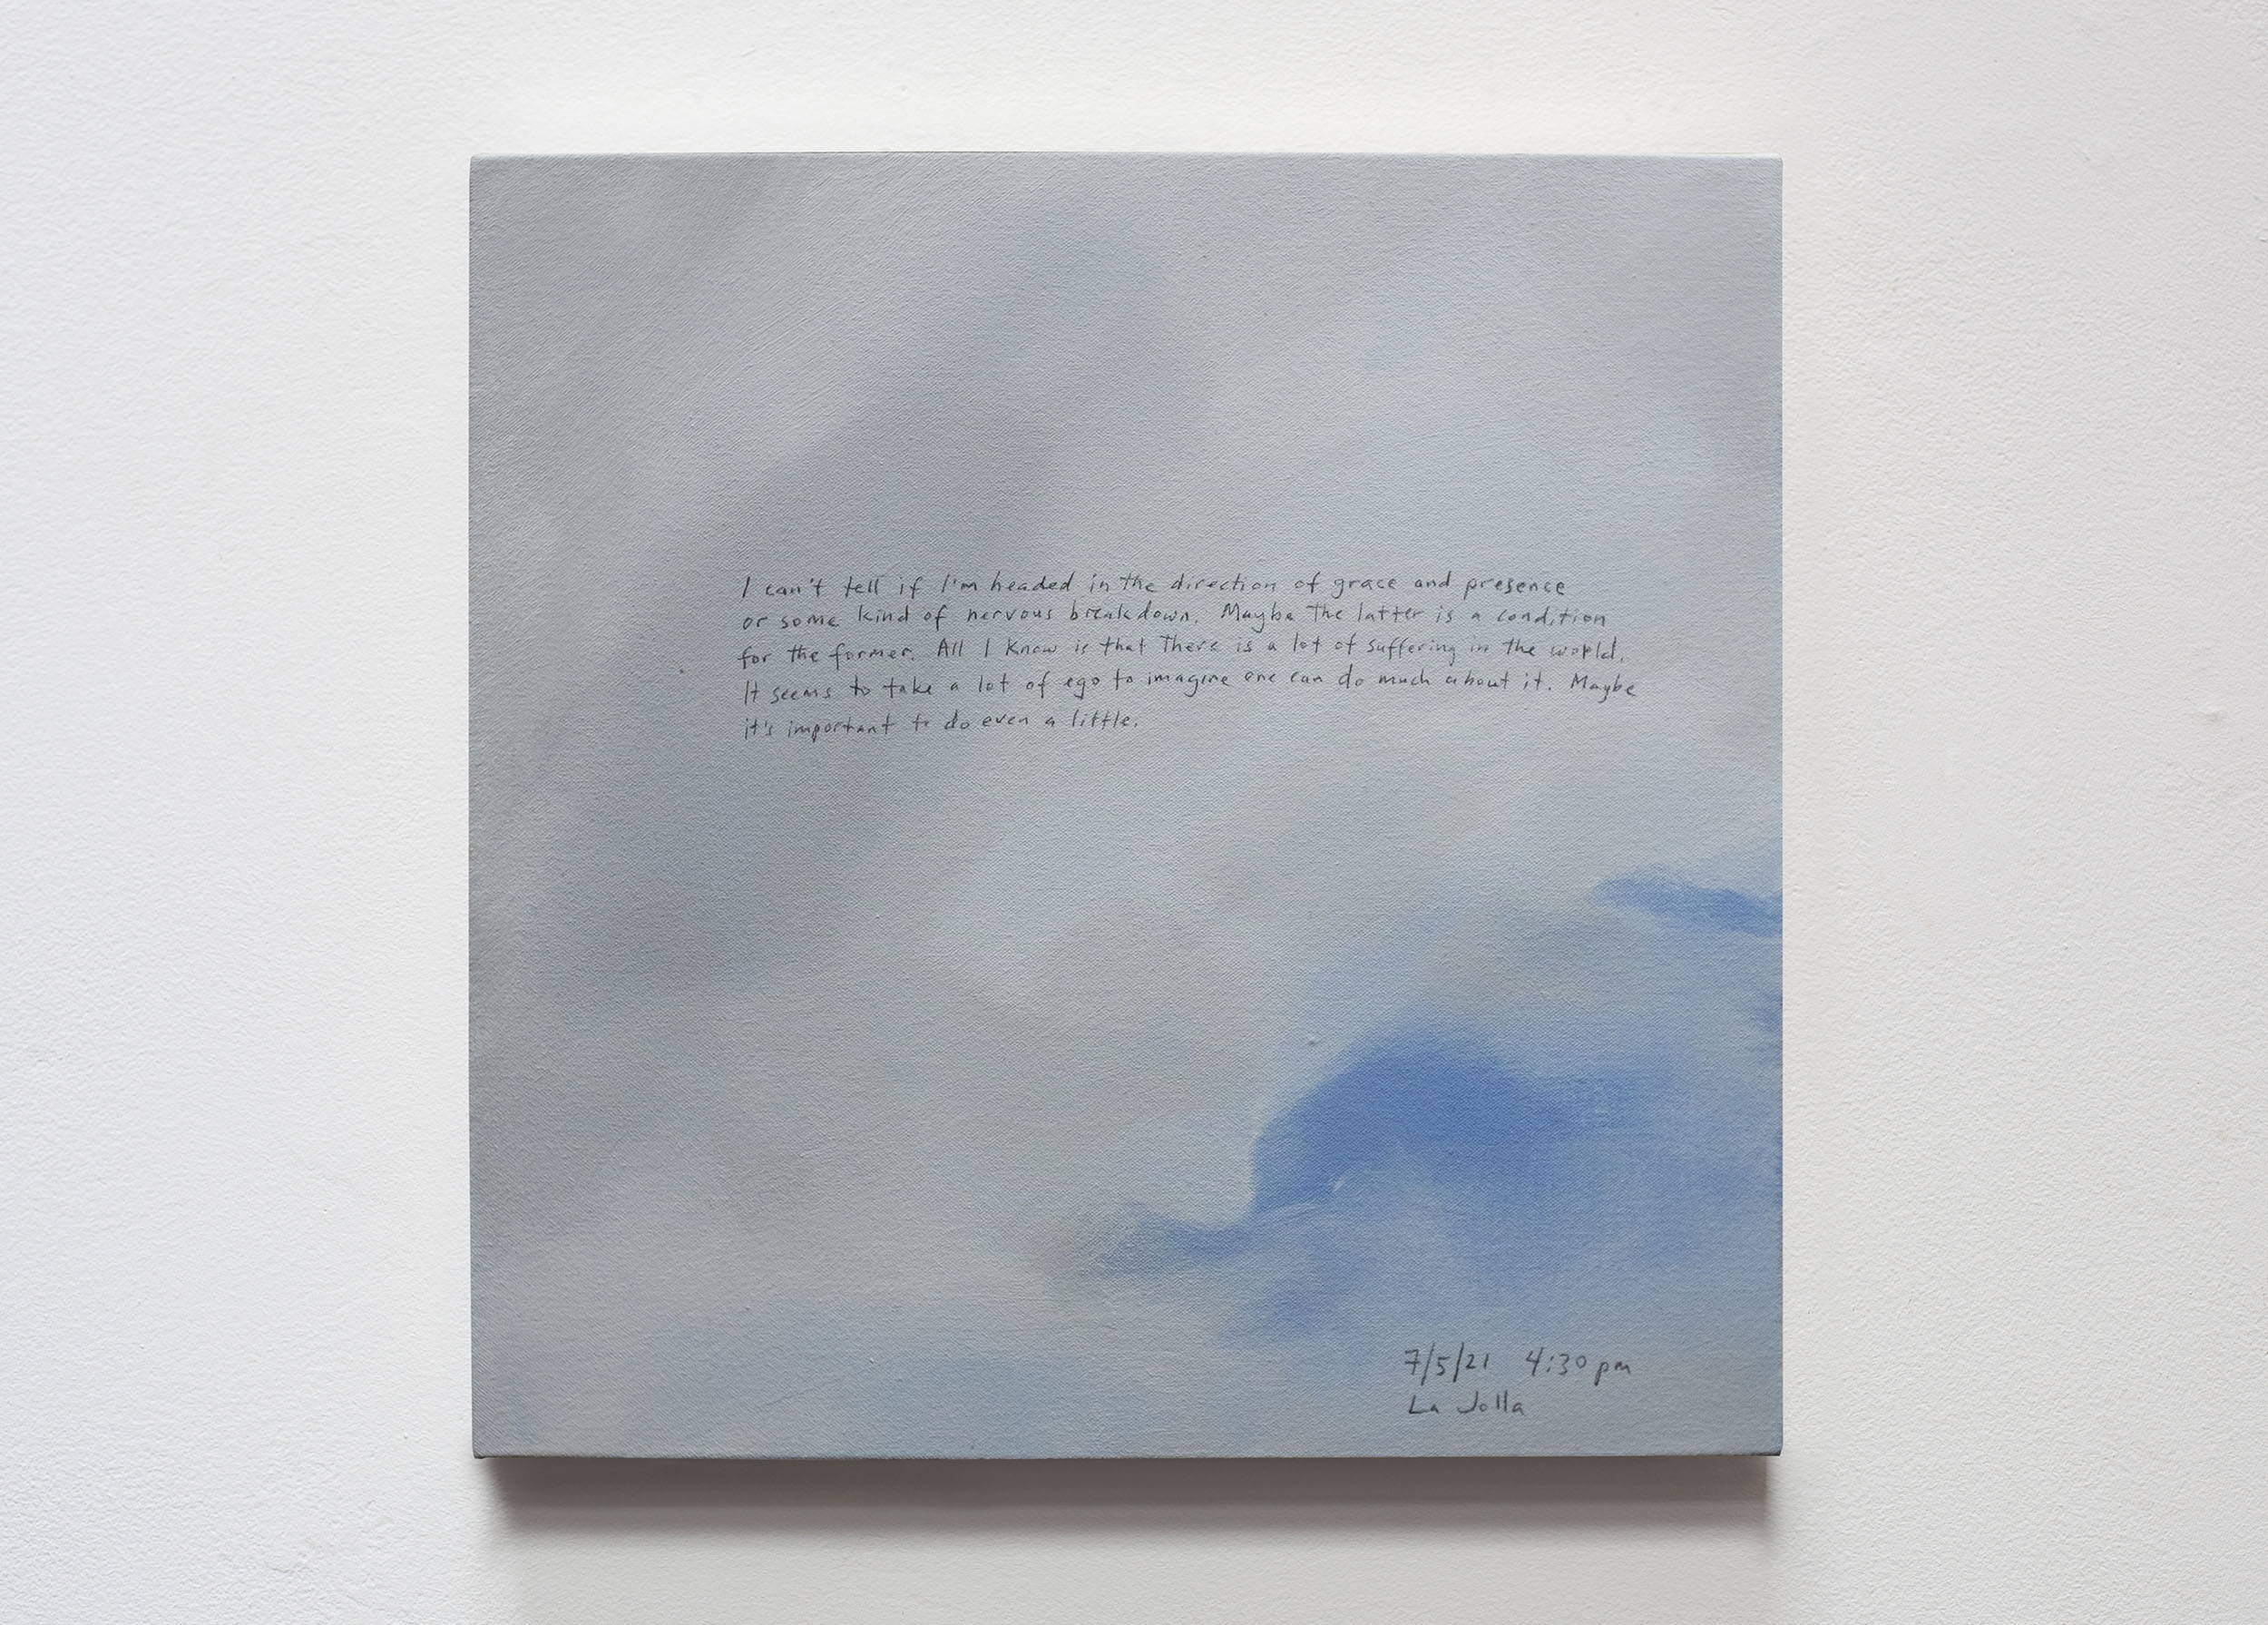 A 14 × 14 inch, acrylic painting of the sky. A journal entry is handwritten on the painting:

“I can’t tell if I’m headed in the direction of grace and presence or some kind of nervous breakdown. Maybe the latter is a condition for the former. All I know is that there is a lot of suffering in the world. It seems to take a lot of ego to imagine one can do much about it. Maybe it’s important to do even a little.

7/5/21 4:30 pm
La Jolla”